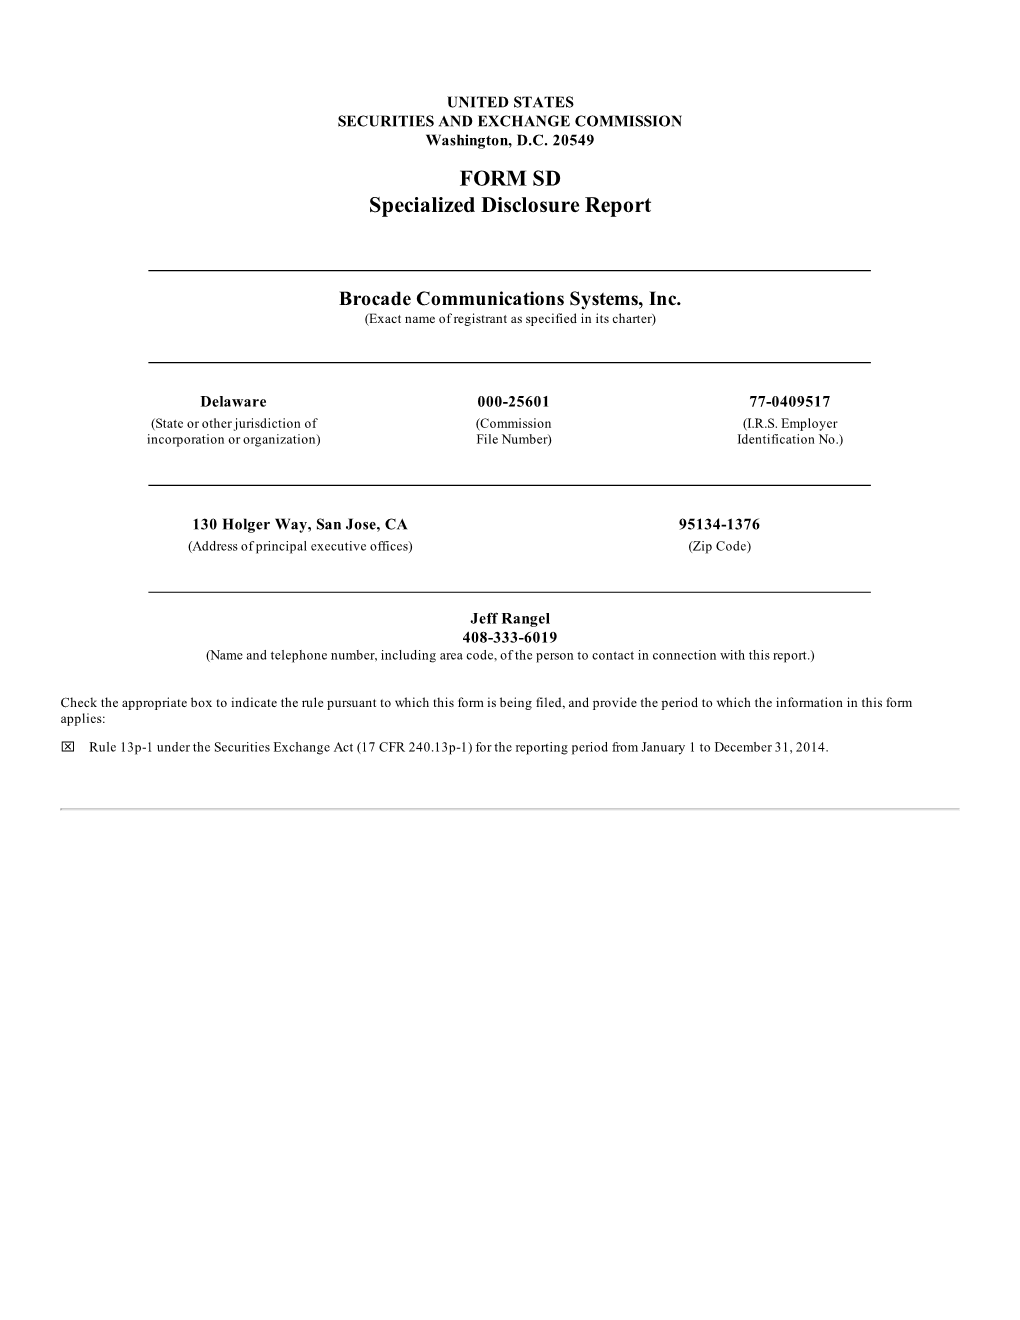 FORM SD Specialized Disclosure Report